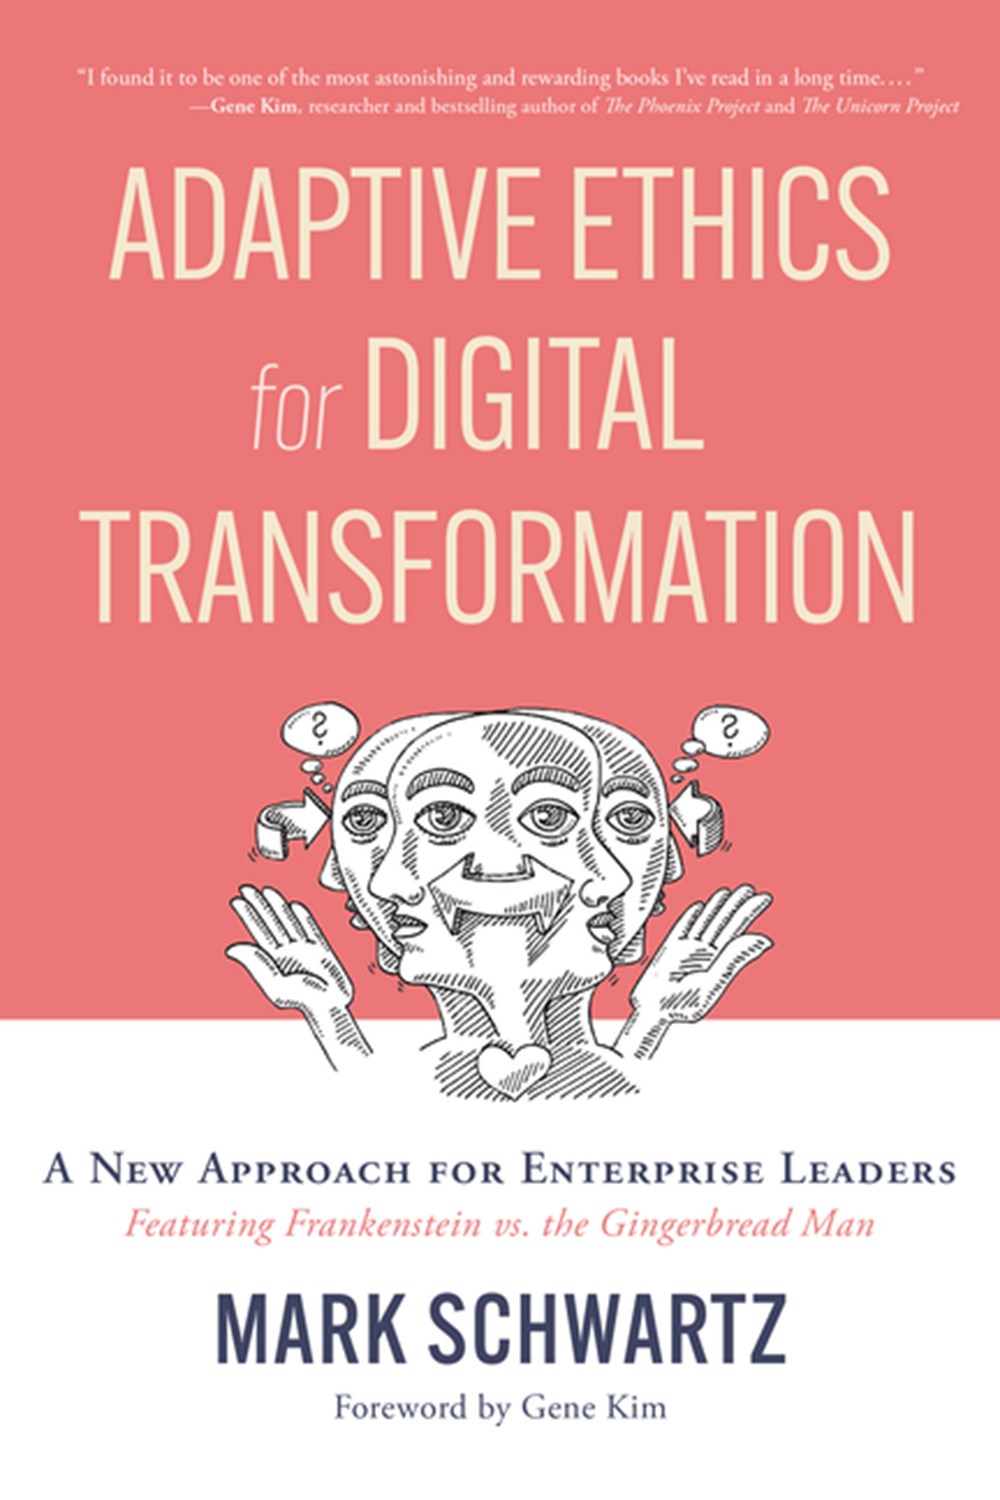 Adaptive Ethics for Digital Transformation: A New Approach for Enterprise Leaders (Featuring Franken